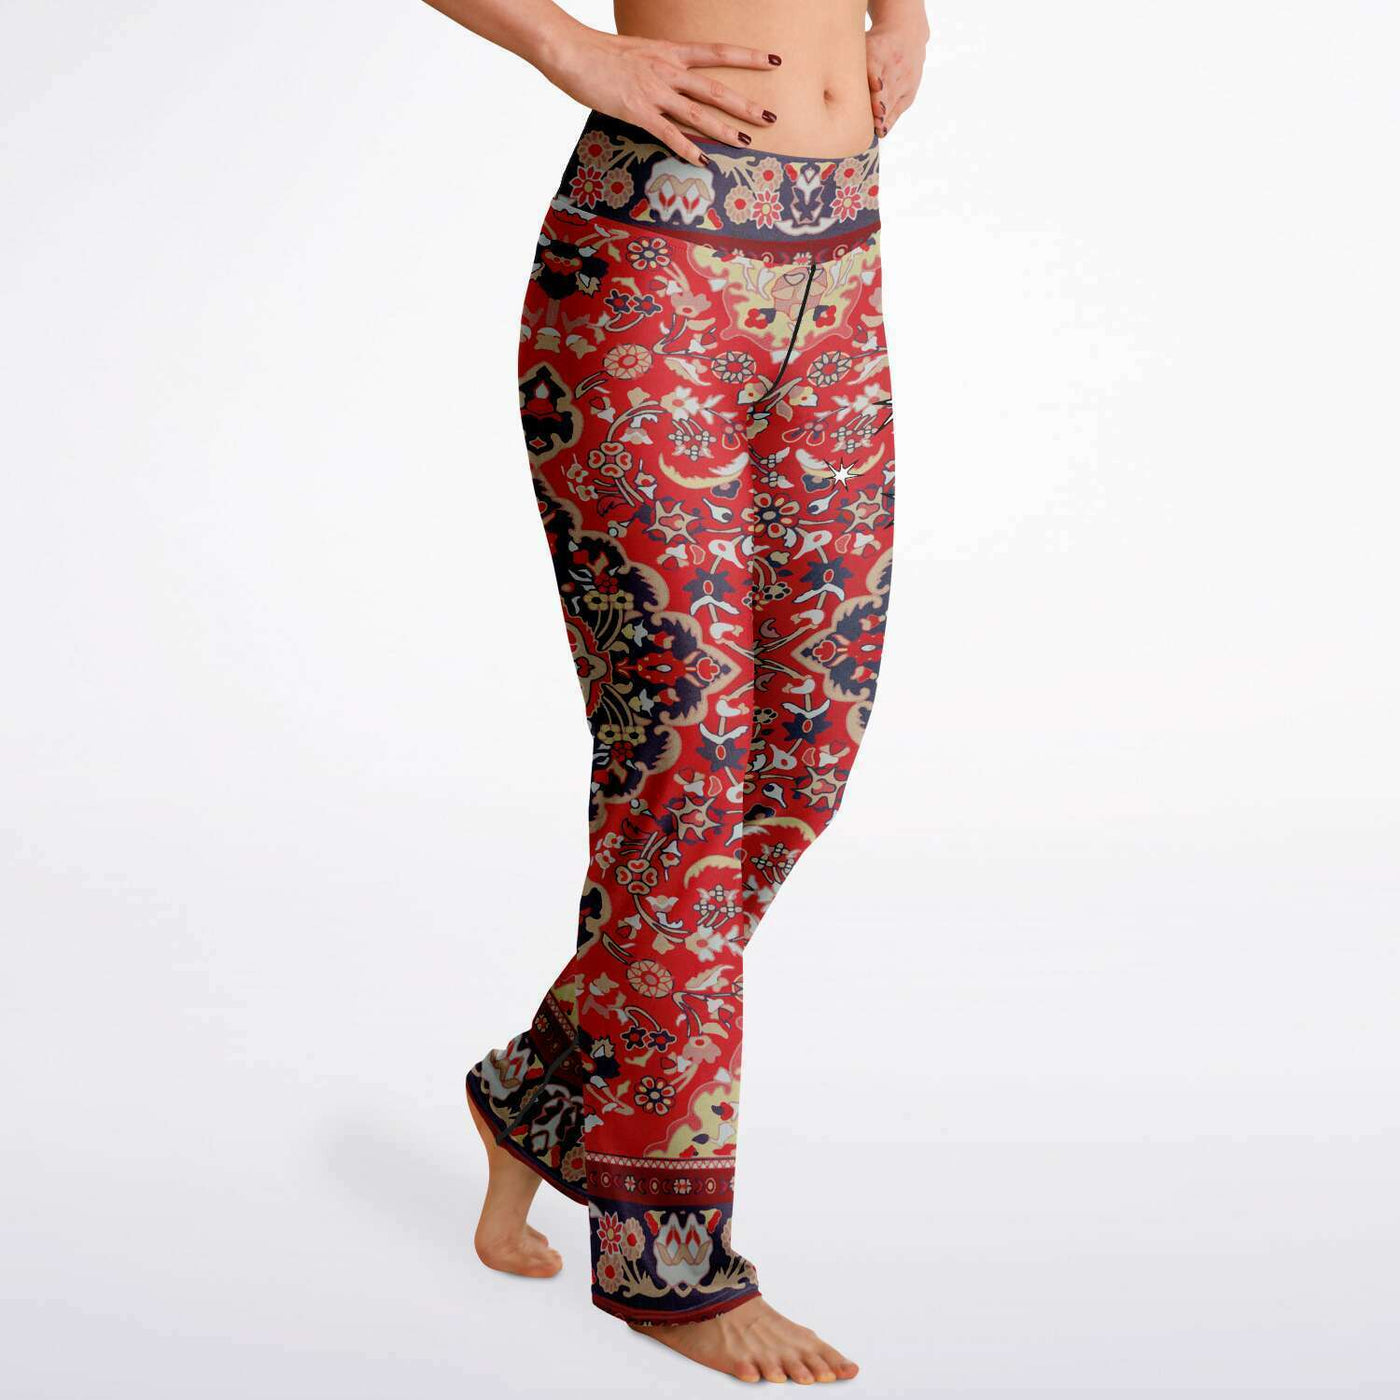 The Dude's Rug | Lebowski Flare Leggings - Party outfit copy